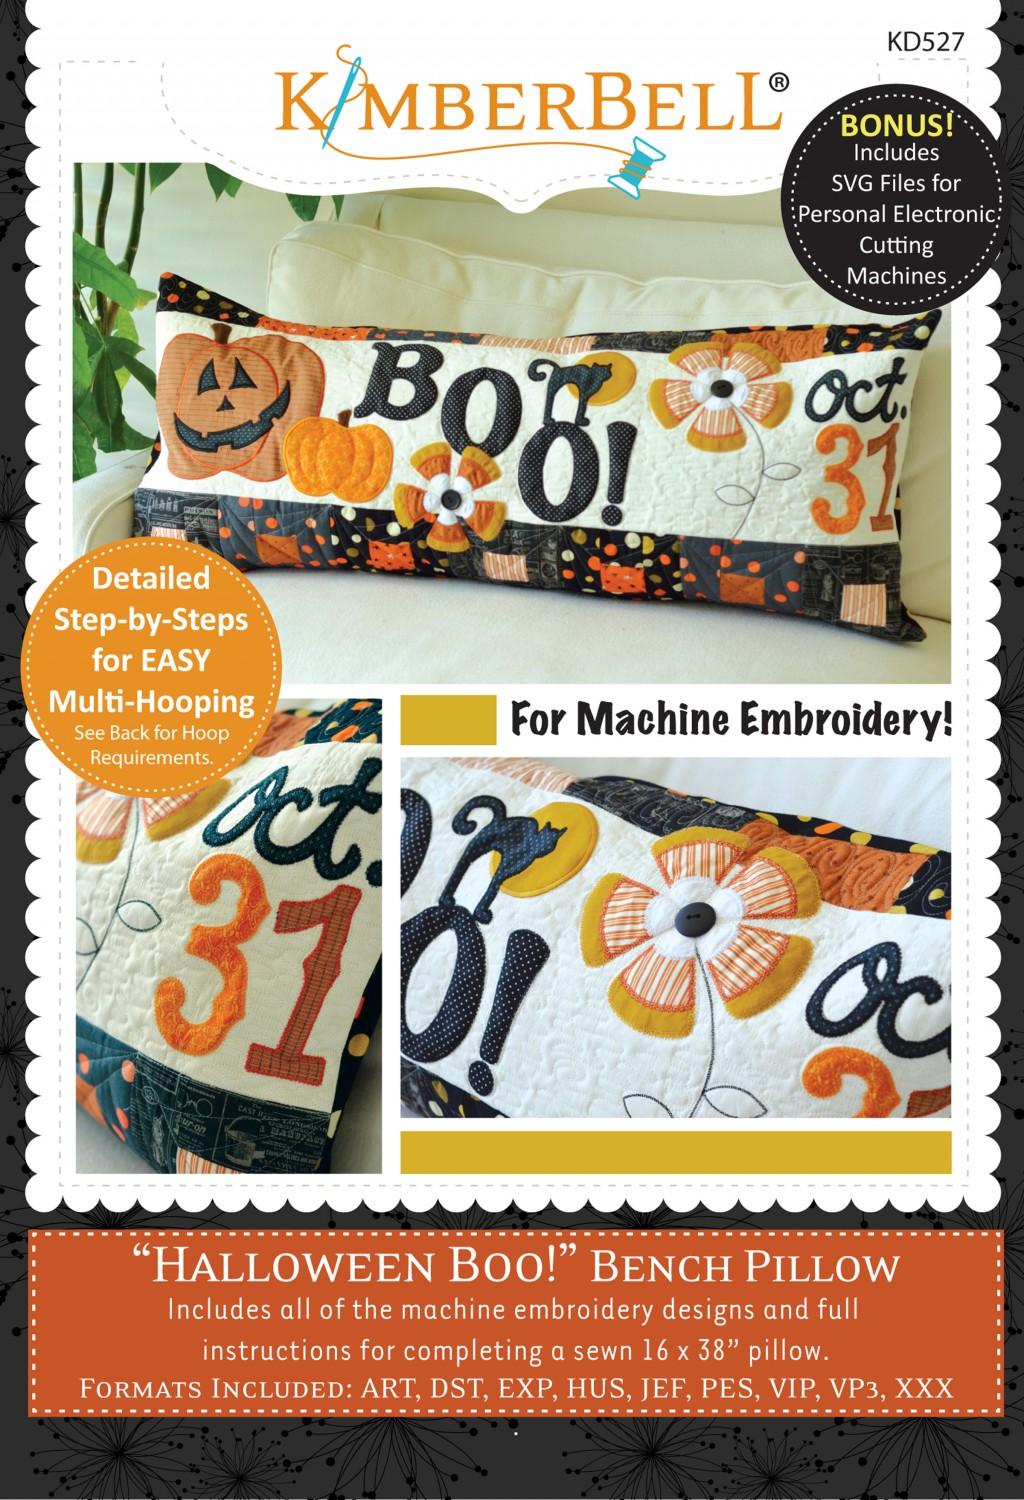 Halloween Boo! Bench Pillow (Machine Embroidery) # KD527